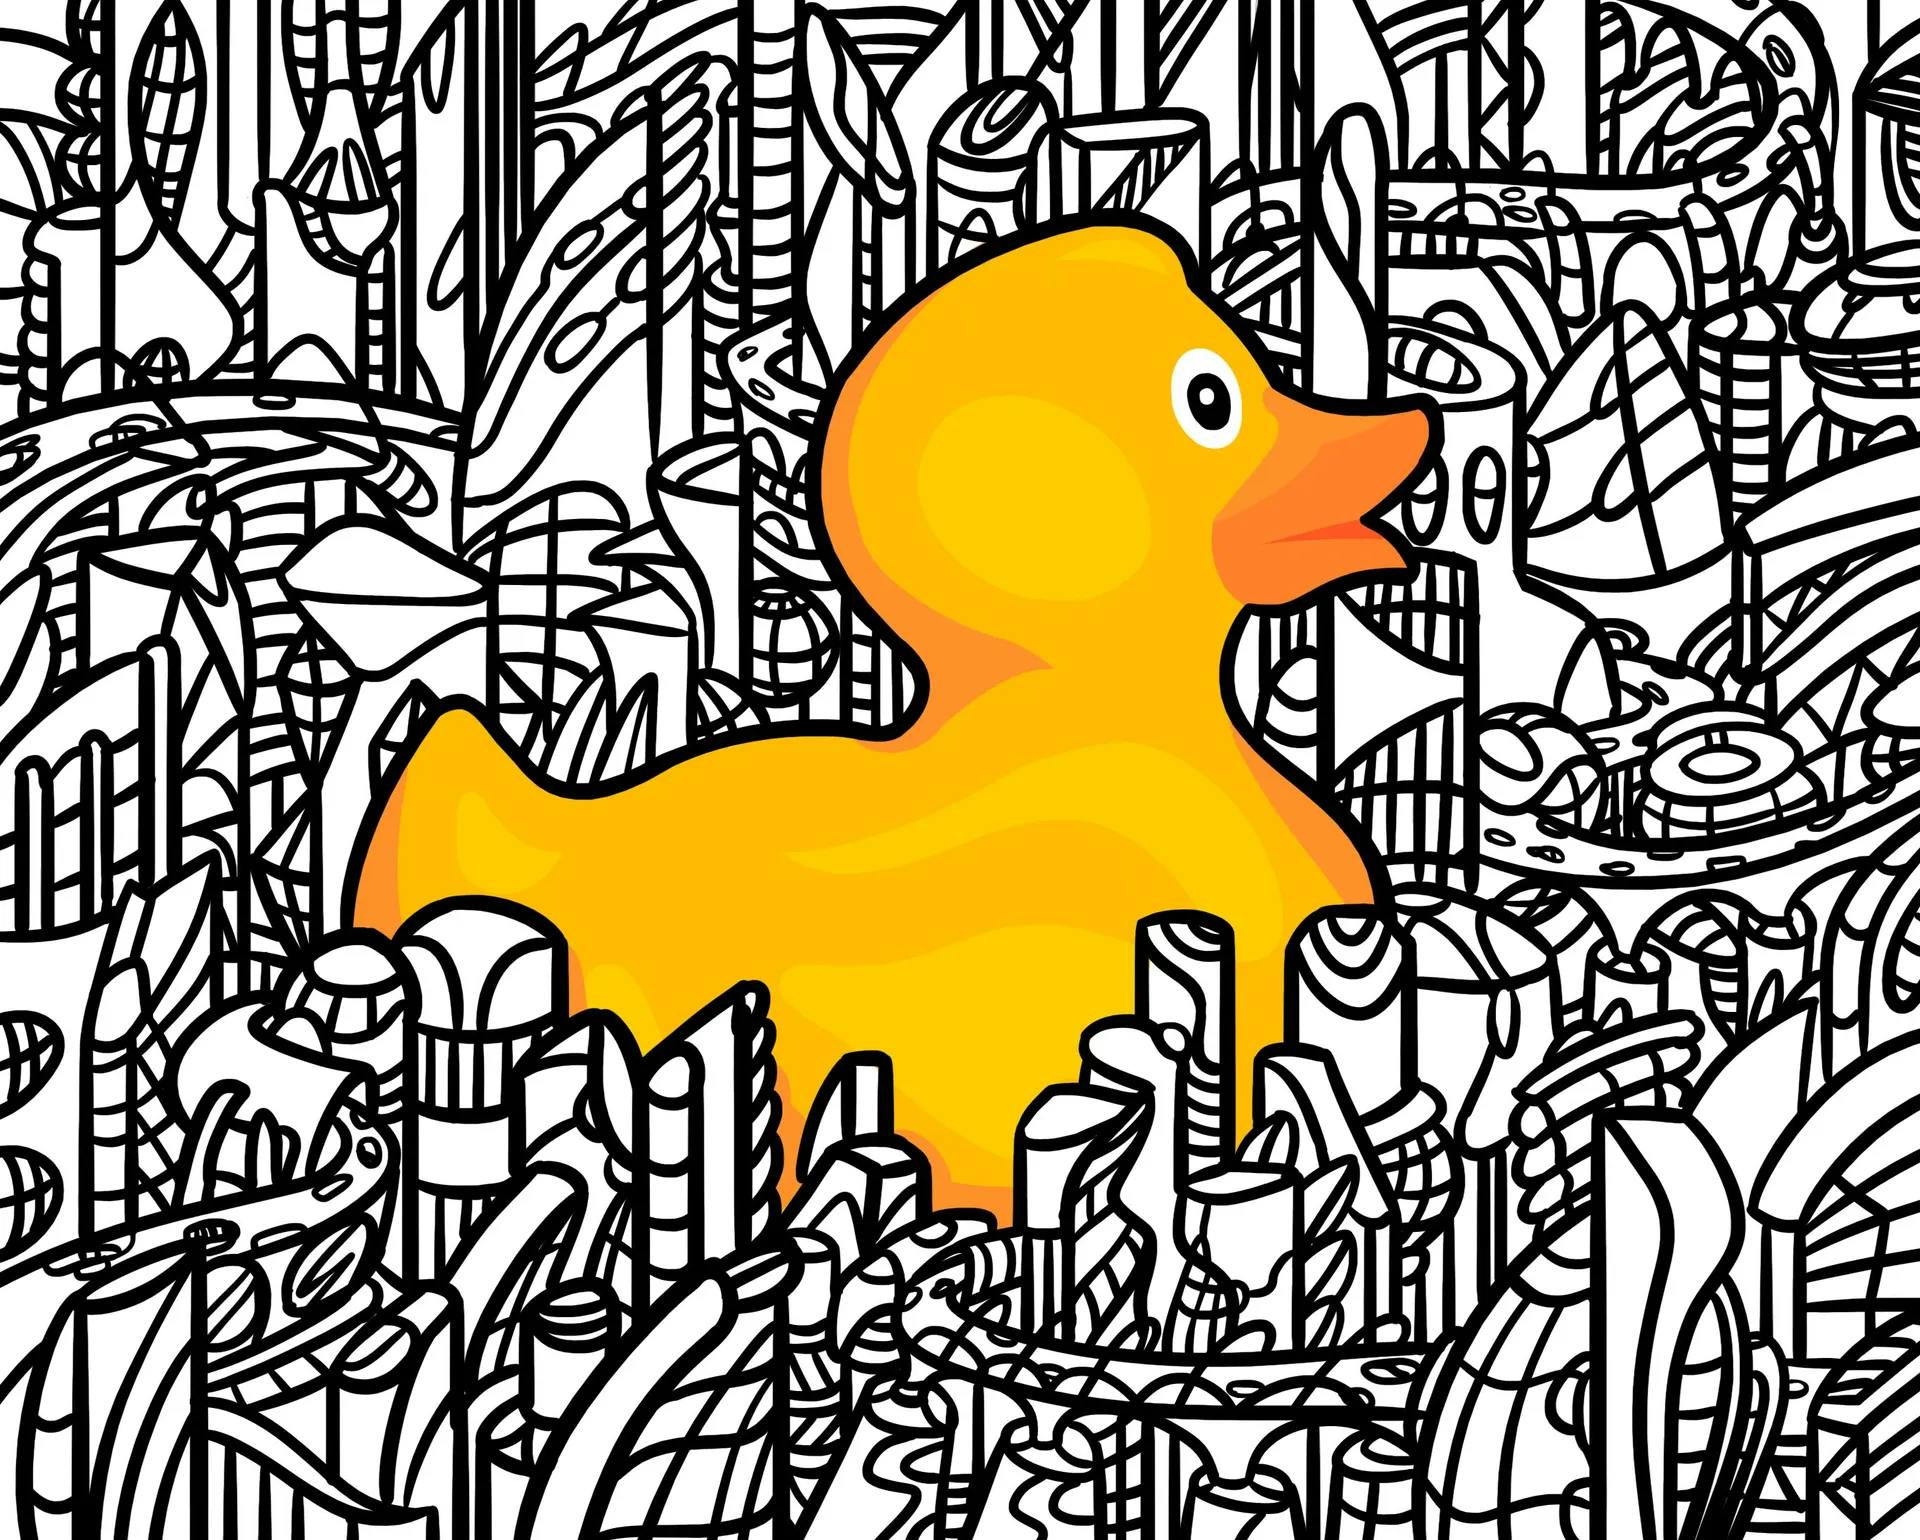 Duck in the City